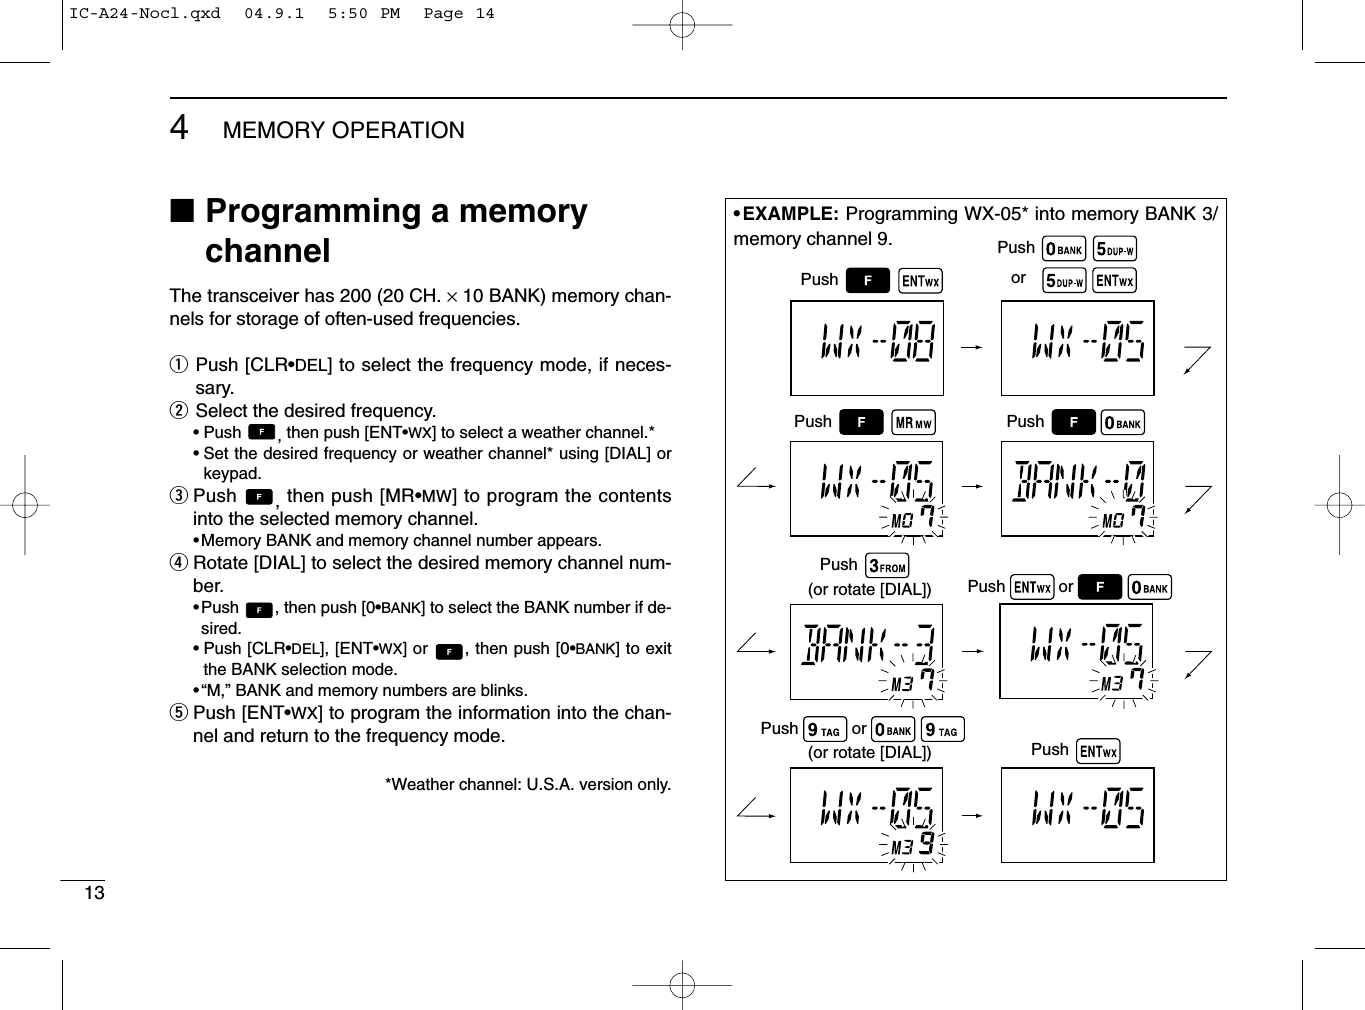 134MEMORY OPERATION■Programming a memorychannelThe transceiver has 200 (20 CH. ×10 BANK) memory chan-nels for storage of often-used frequencies.qPush [CLR•DEL] to select the frequency mode, if neces-sary.wSelect the desired frequency.• Push  , then push [ENT•WX] to select a weather channel.*•Set the desired frequency or weather channel* using [DIAL] orkeypad.ePush  , then push [MR•MW] to program the contentsinto the selected memory channel.•Memory BANK and memory channel number appears.rRotate [DIAL] to select the desired memory channel num-ber.•Push  , then push [0•BANK] to select the BANK number if de-sired. • Push [CLR•DEL], [ENT•WX] or  , then push [0•BANK] to exitthe BANK selection mode.•“M,” BANK and memory numbers are blinks.tPush [ENT•WX] to program the information into the chan-nel and return to the frequency mode.*Weather channel: U.S.A. version only.(or rotate [DIAL])(or rotate [DIAL])PushPushPushPushPushororPushPushPushor• EXAMPLE: Programming WX-05* into memory BANK 3/memory channel 9.IC-A24-Nocl.qxd  04.9.1  5:50 PM  Page 14